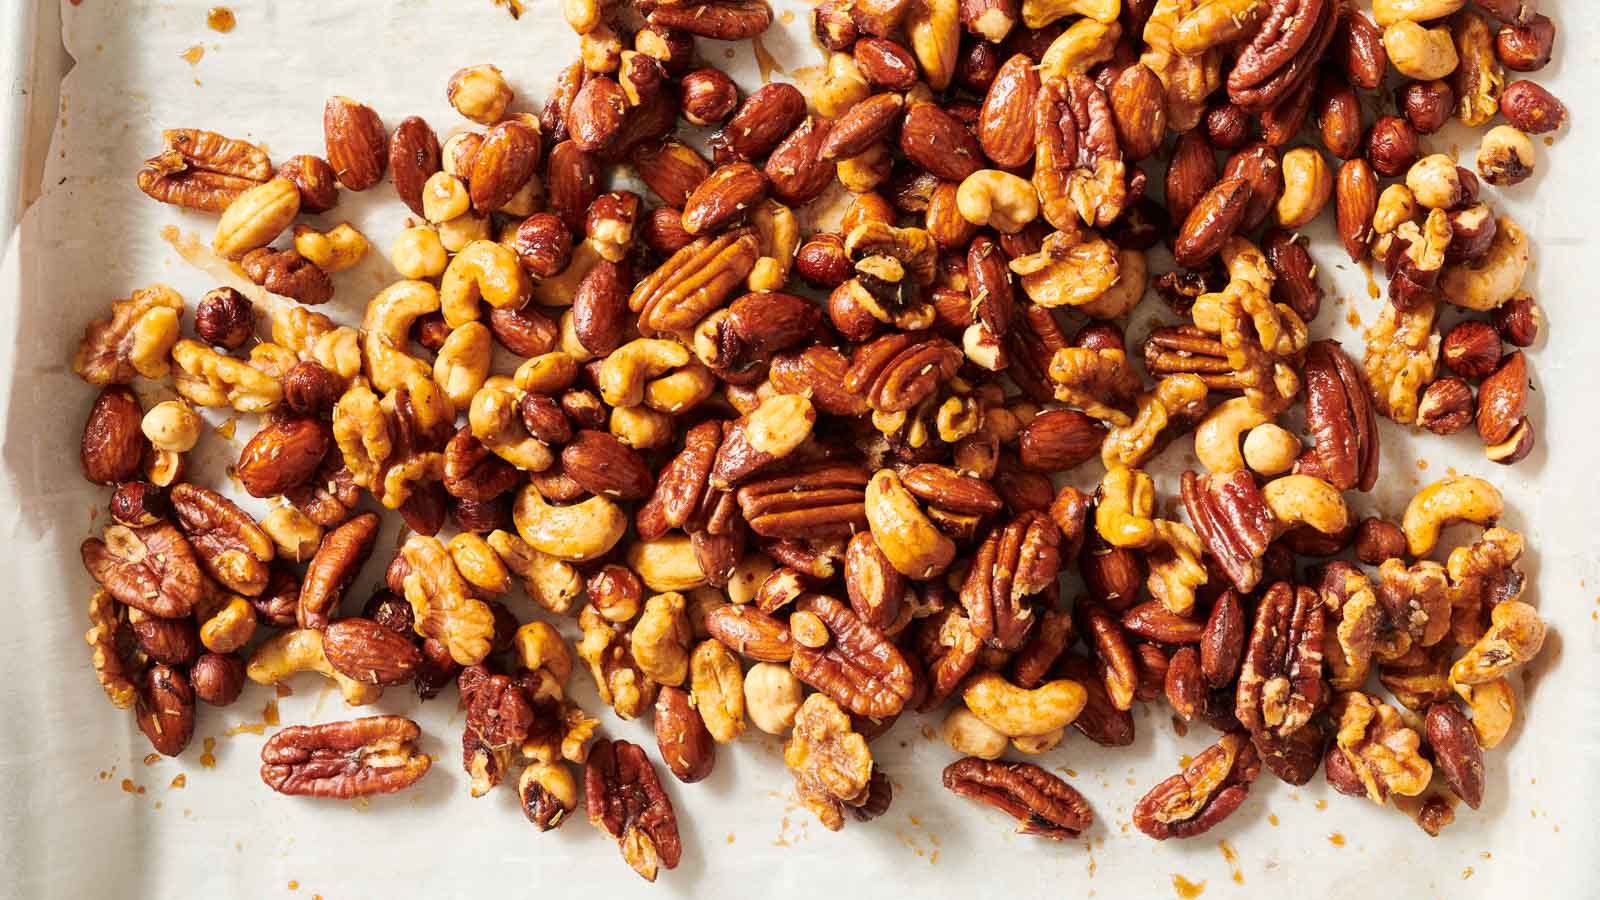 Spicy Herb-Roasted Nuts recipe